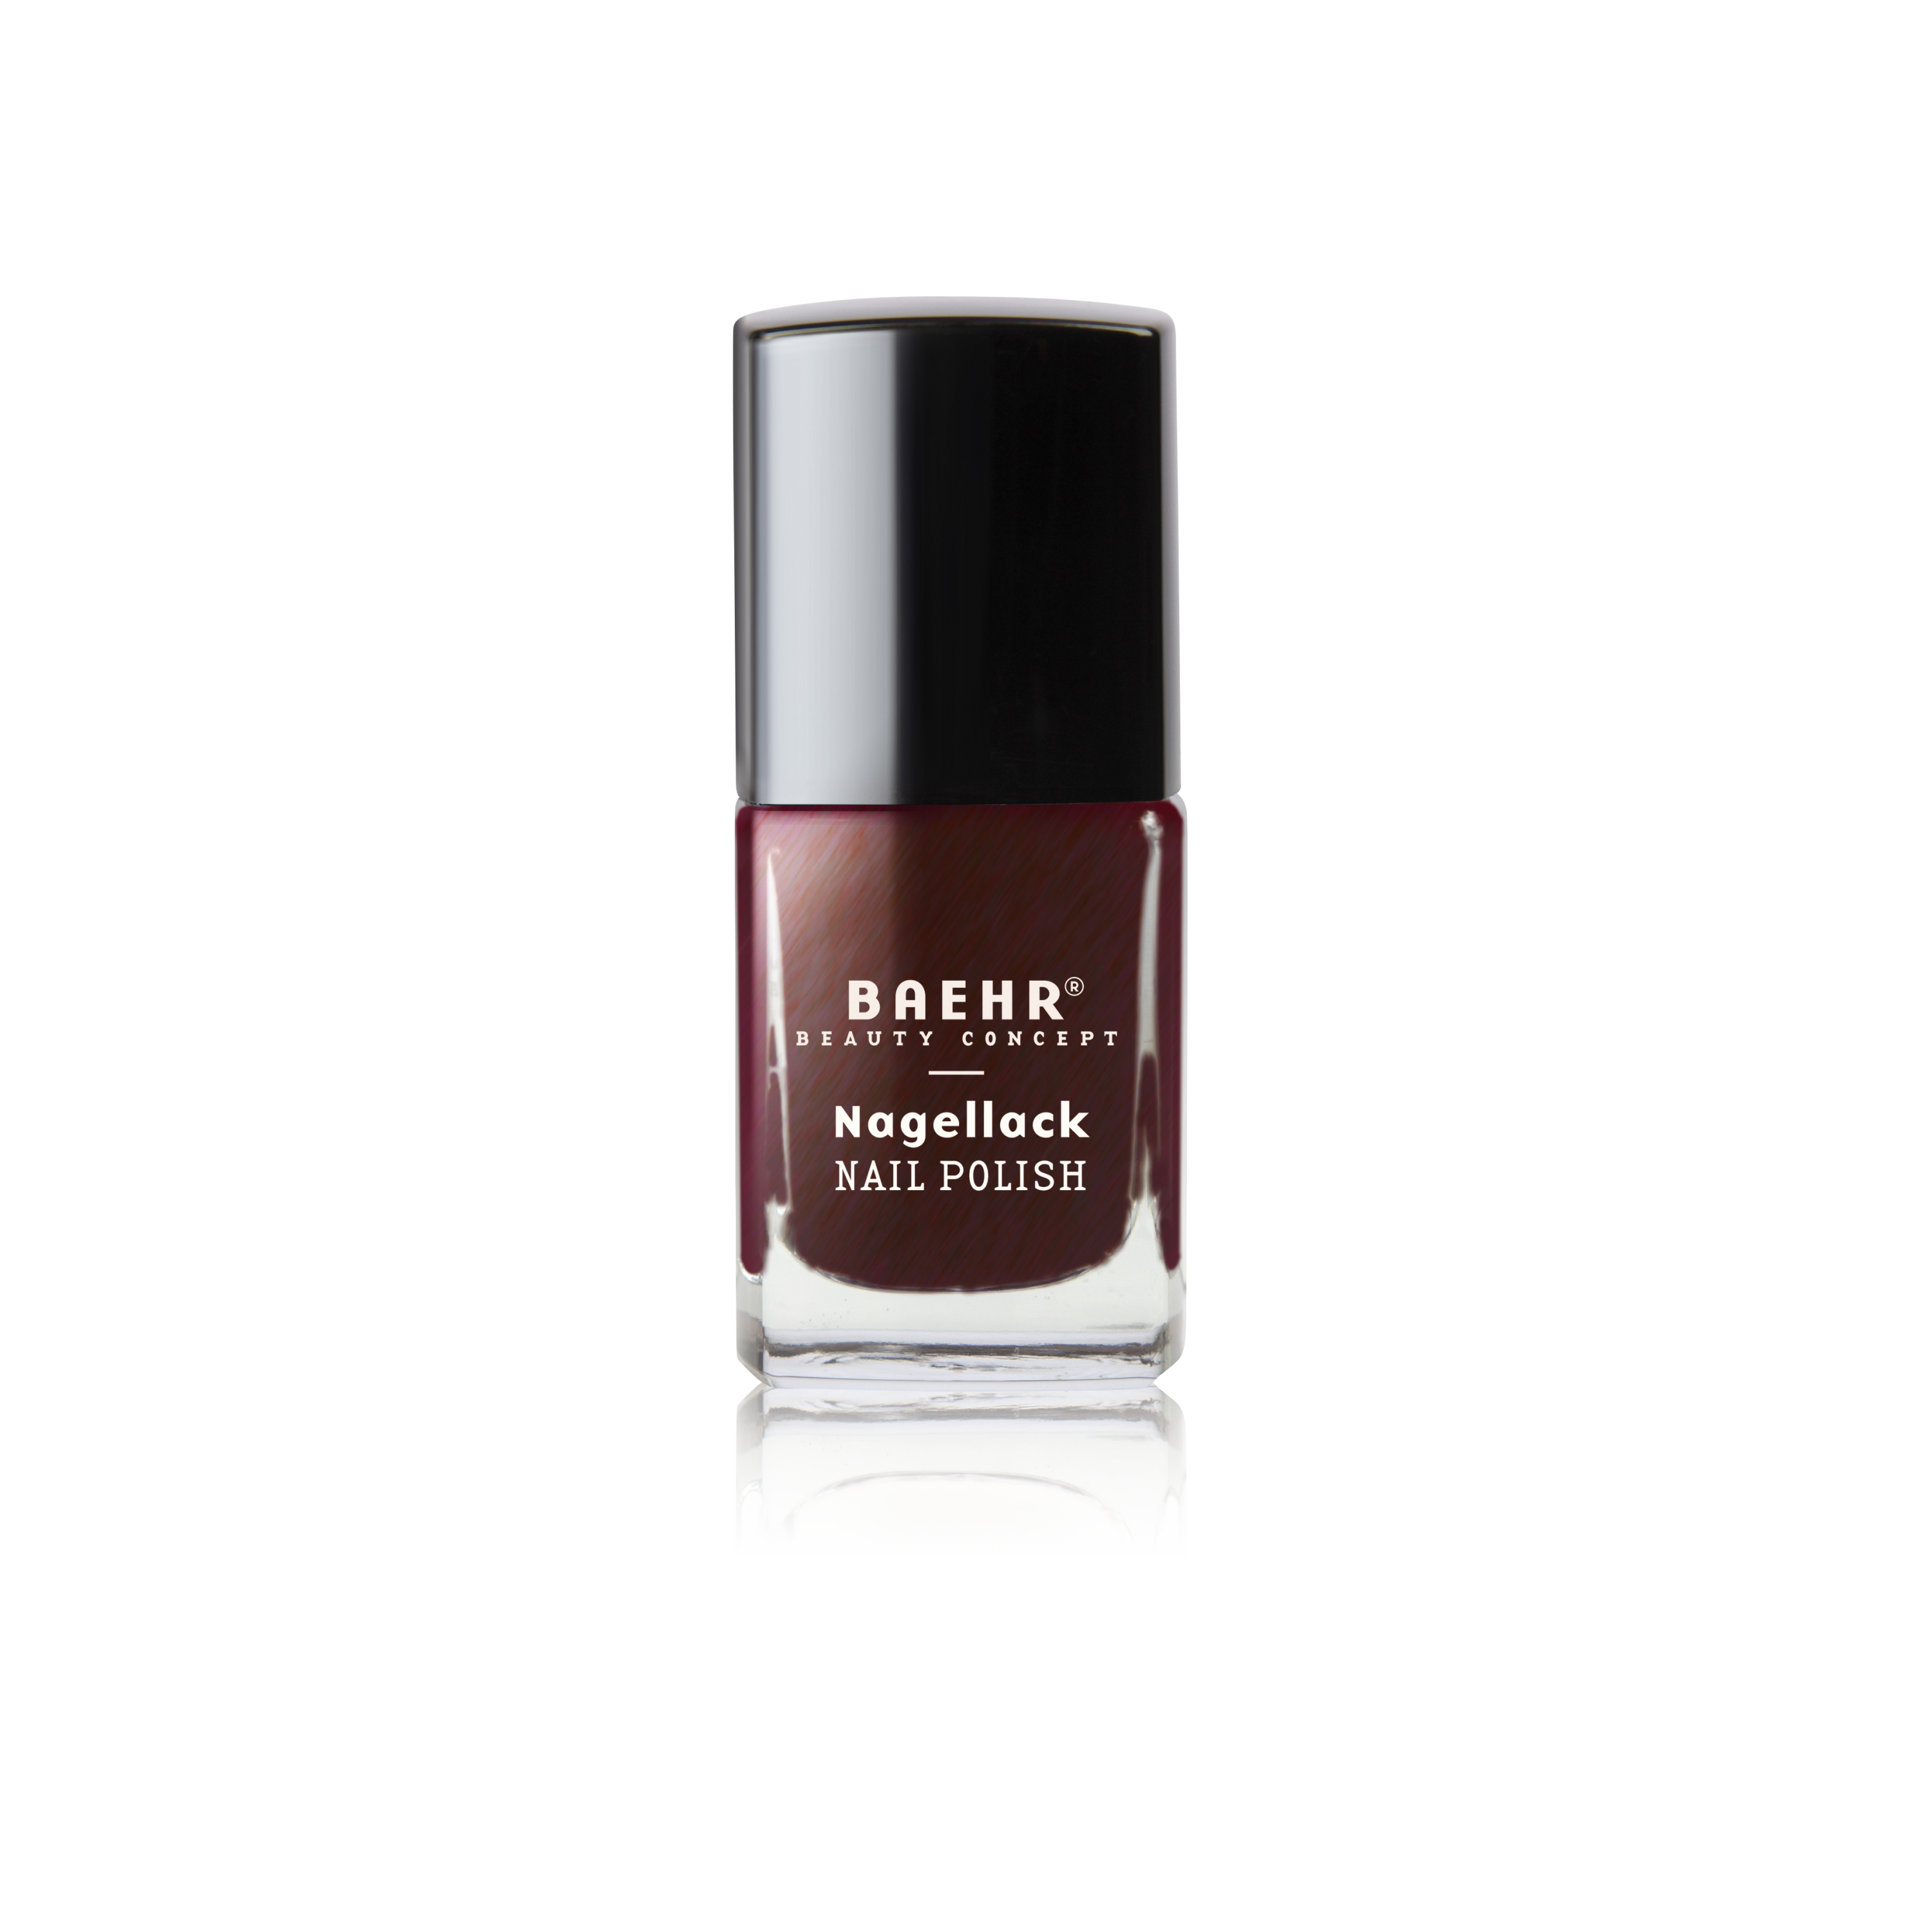 BAEHR BEAUTY CONCEPT - NAILS Nagellack brombeer 11 ml